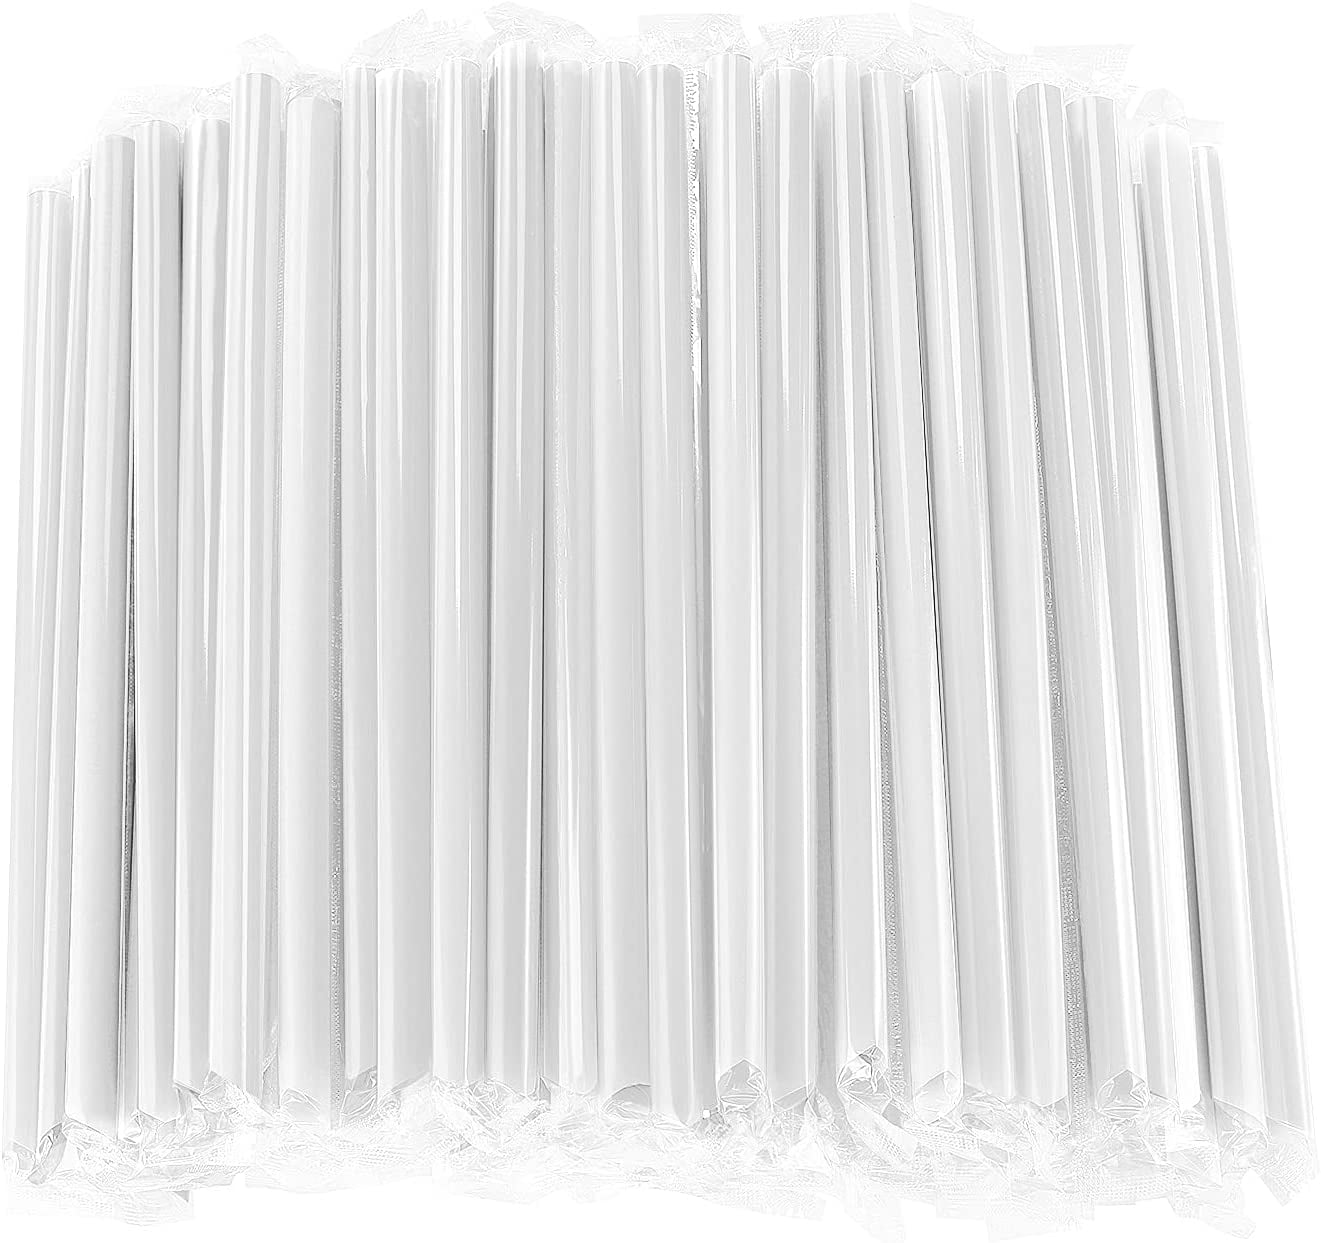 ALINK Glass Boba Straws, 14 mm x 9 inch Reusable Jumbo Clear Bubble Tea  Straws for Smoothie, Tapioca Poping Pearls, Shakes, Pack 2 with Cleaning  Brush